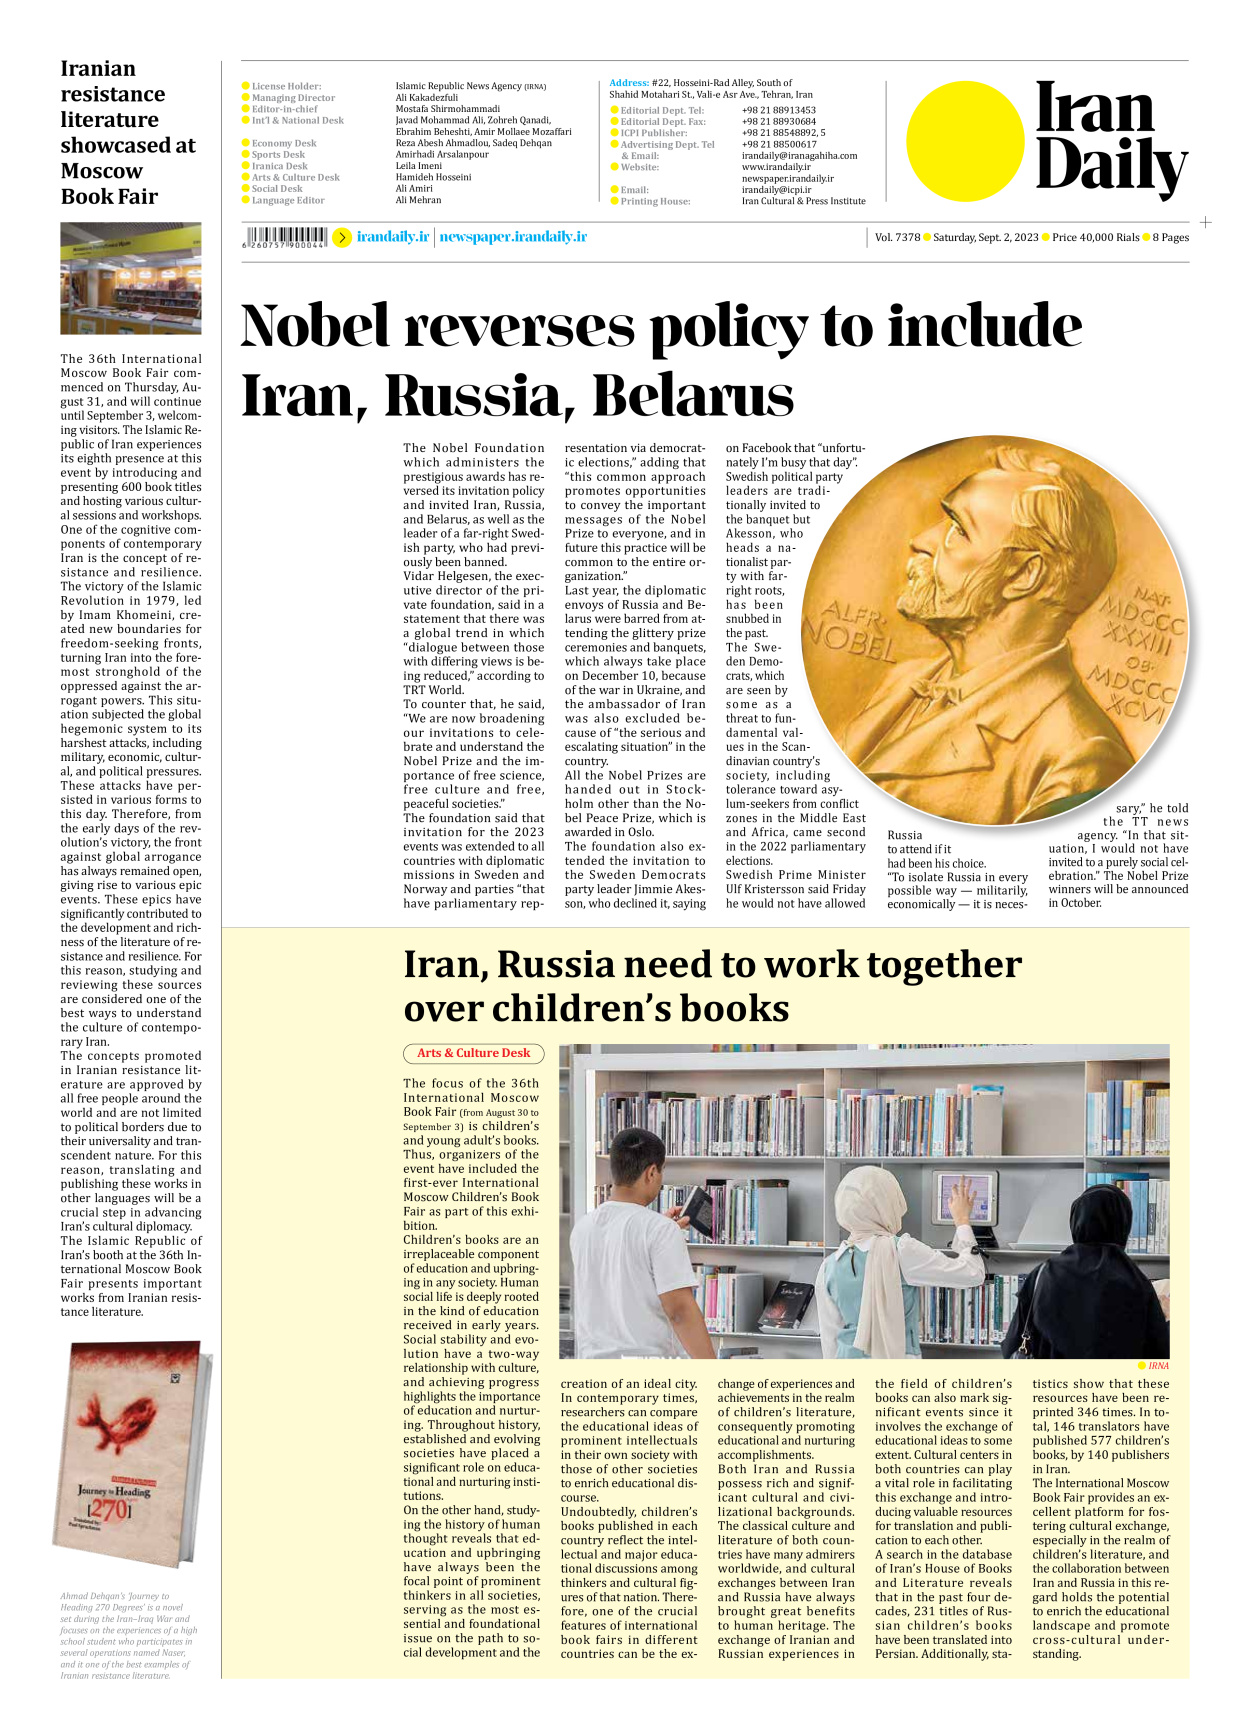 Iran Daily - Number Seven Thousand Three Hundred and Seventy Eight - 02 September 2023 - Page 8